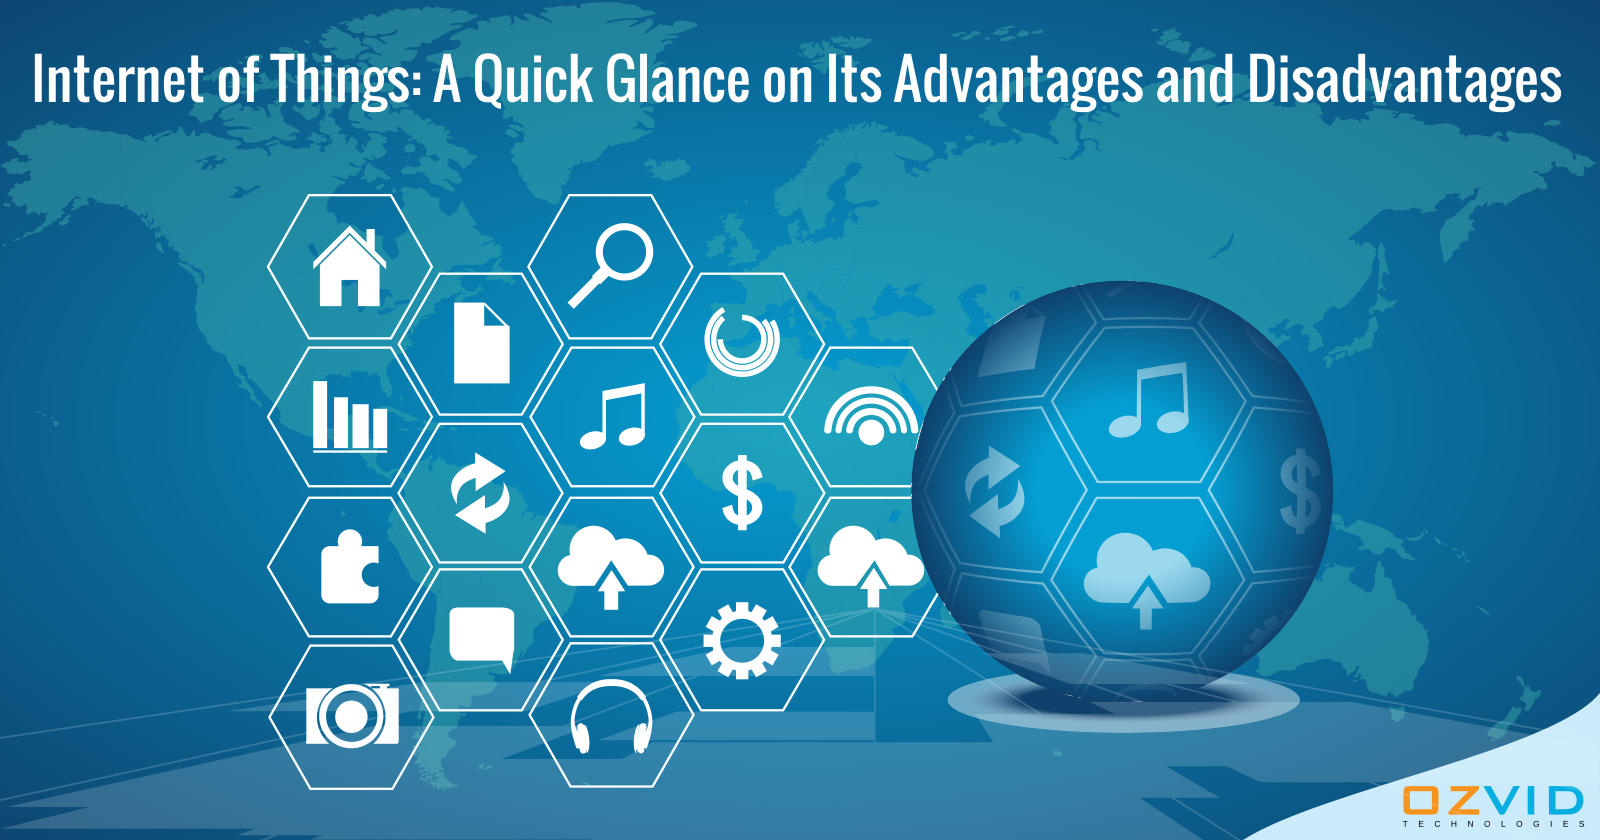 Internet of Things: A Quick Glance on Its Advantages and Disadvantages